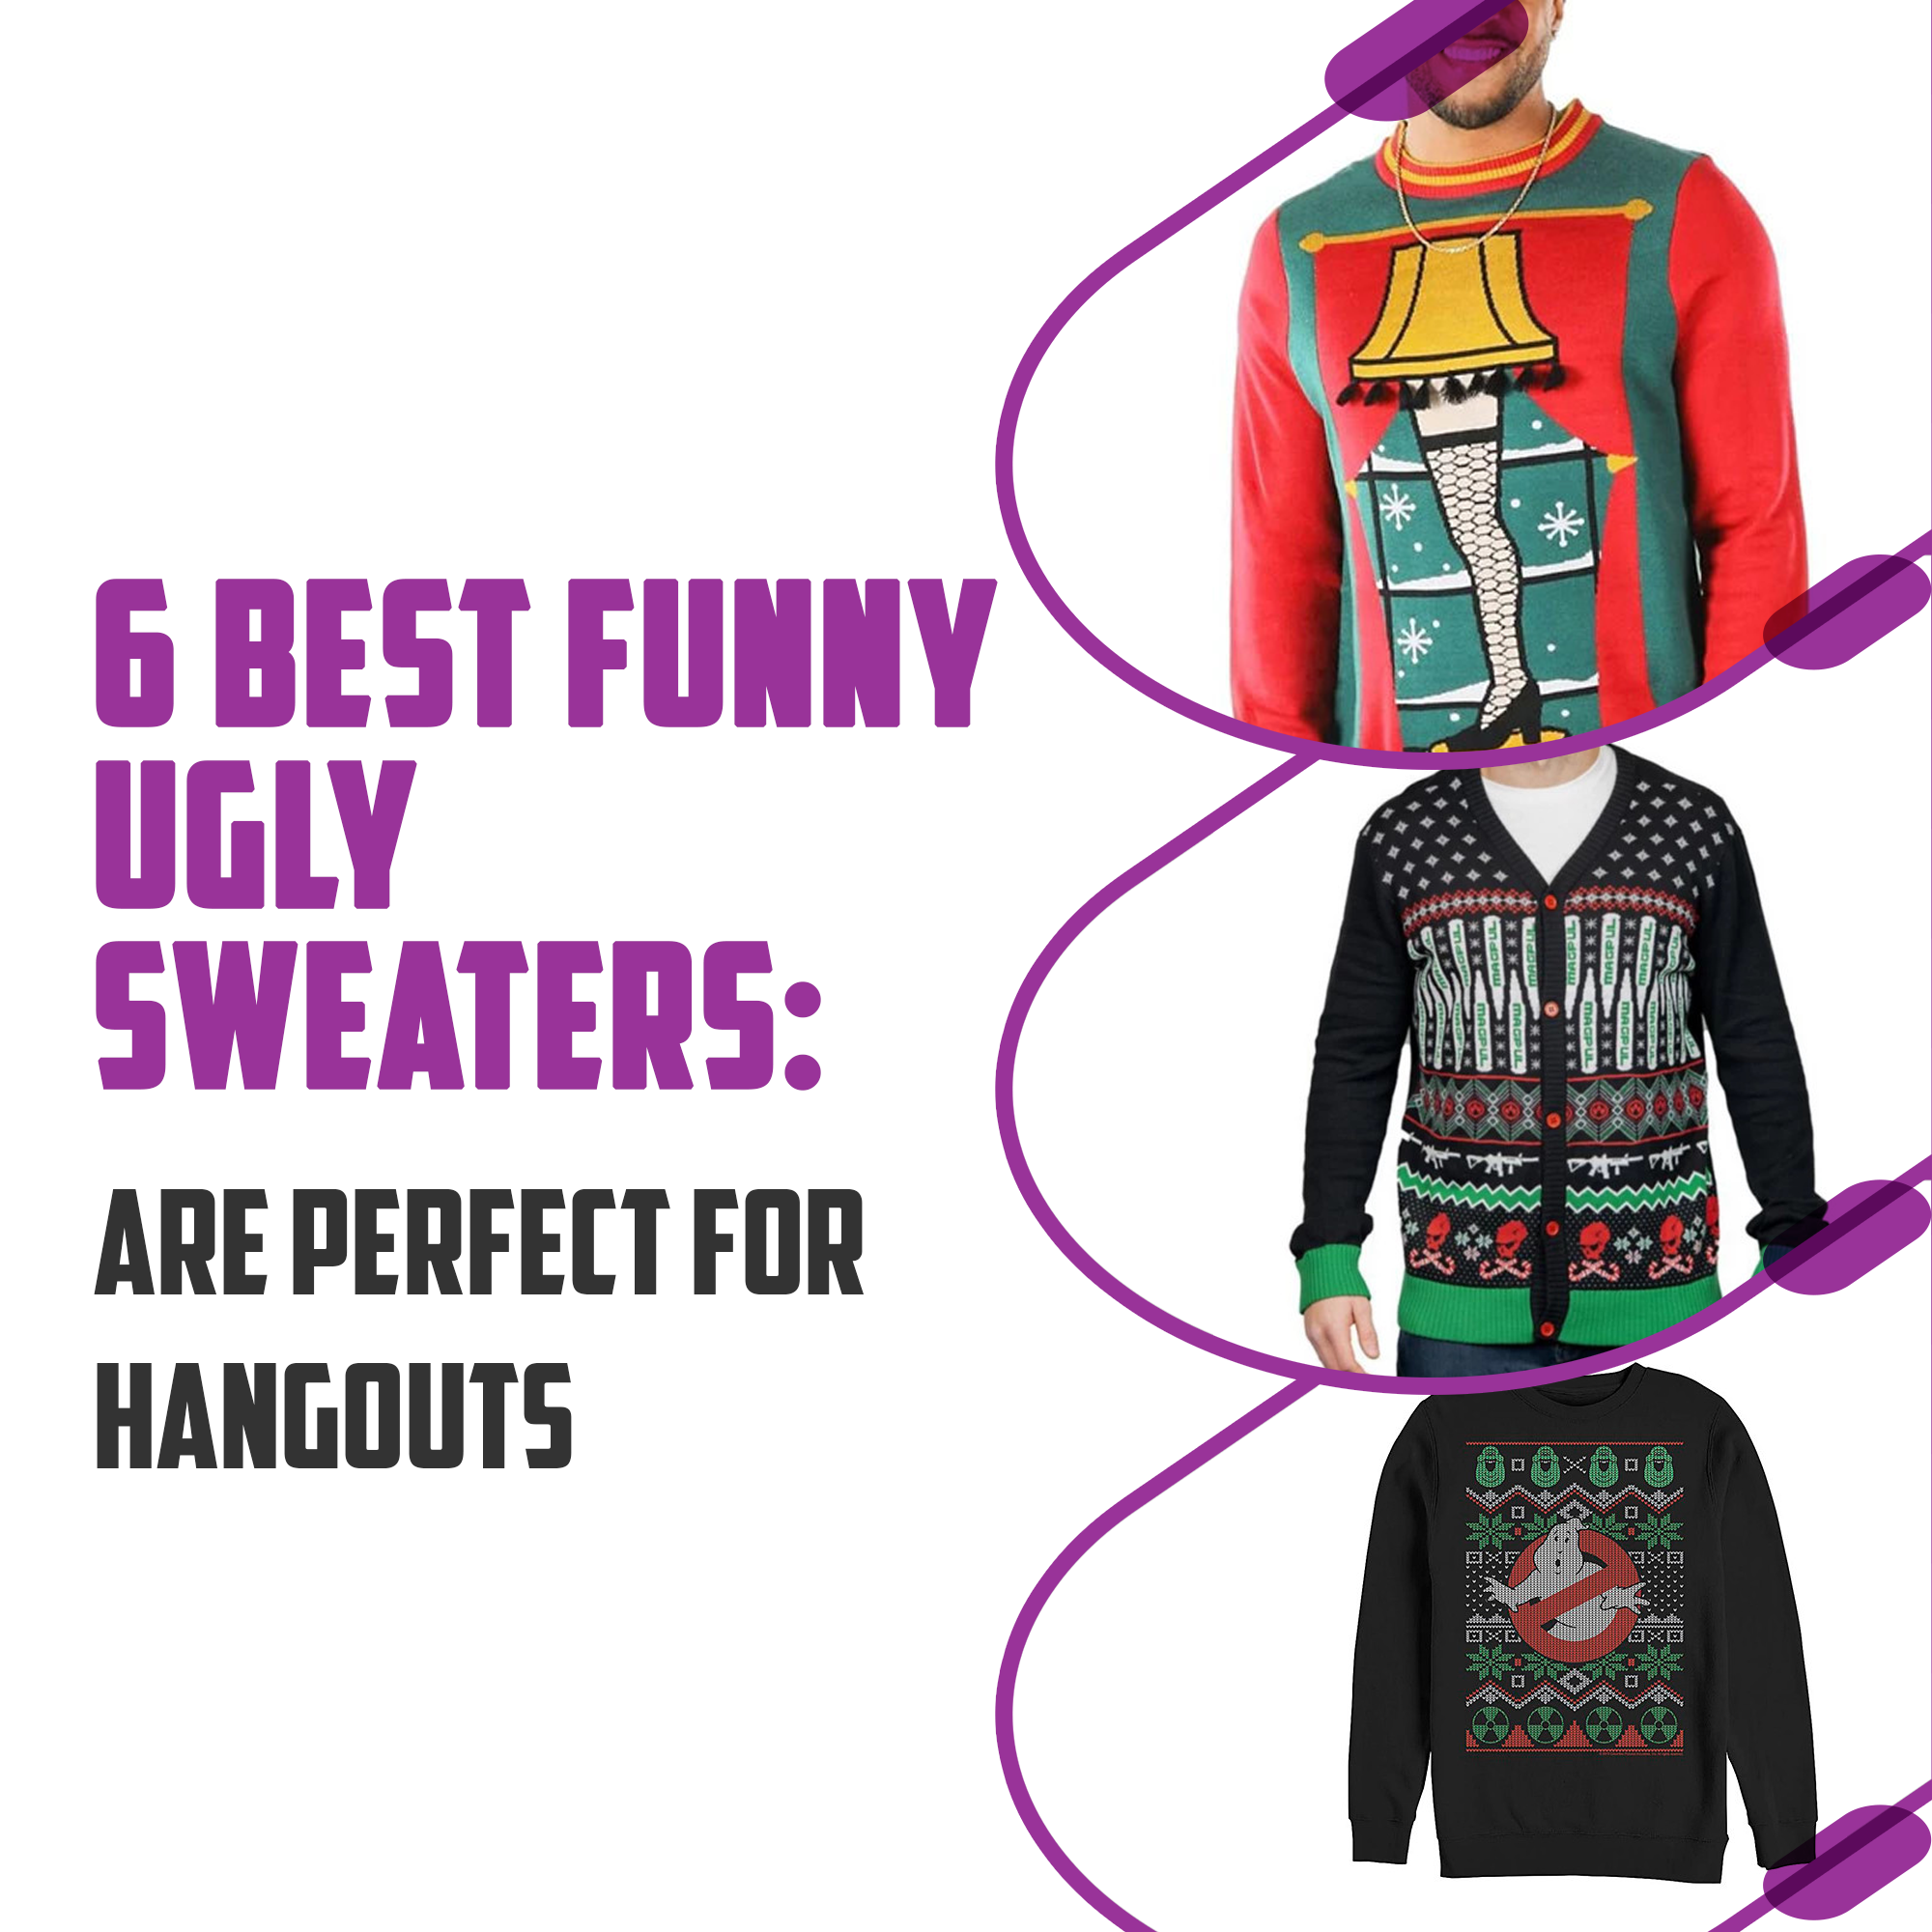 6 Best Funny Ugly Sweaters: Are Perfect For Hangouts